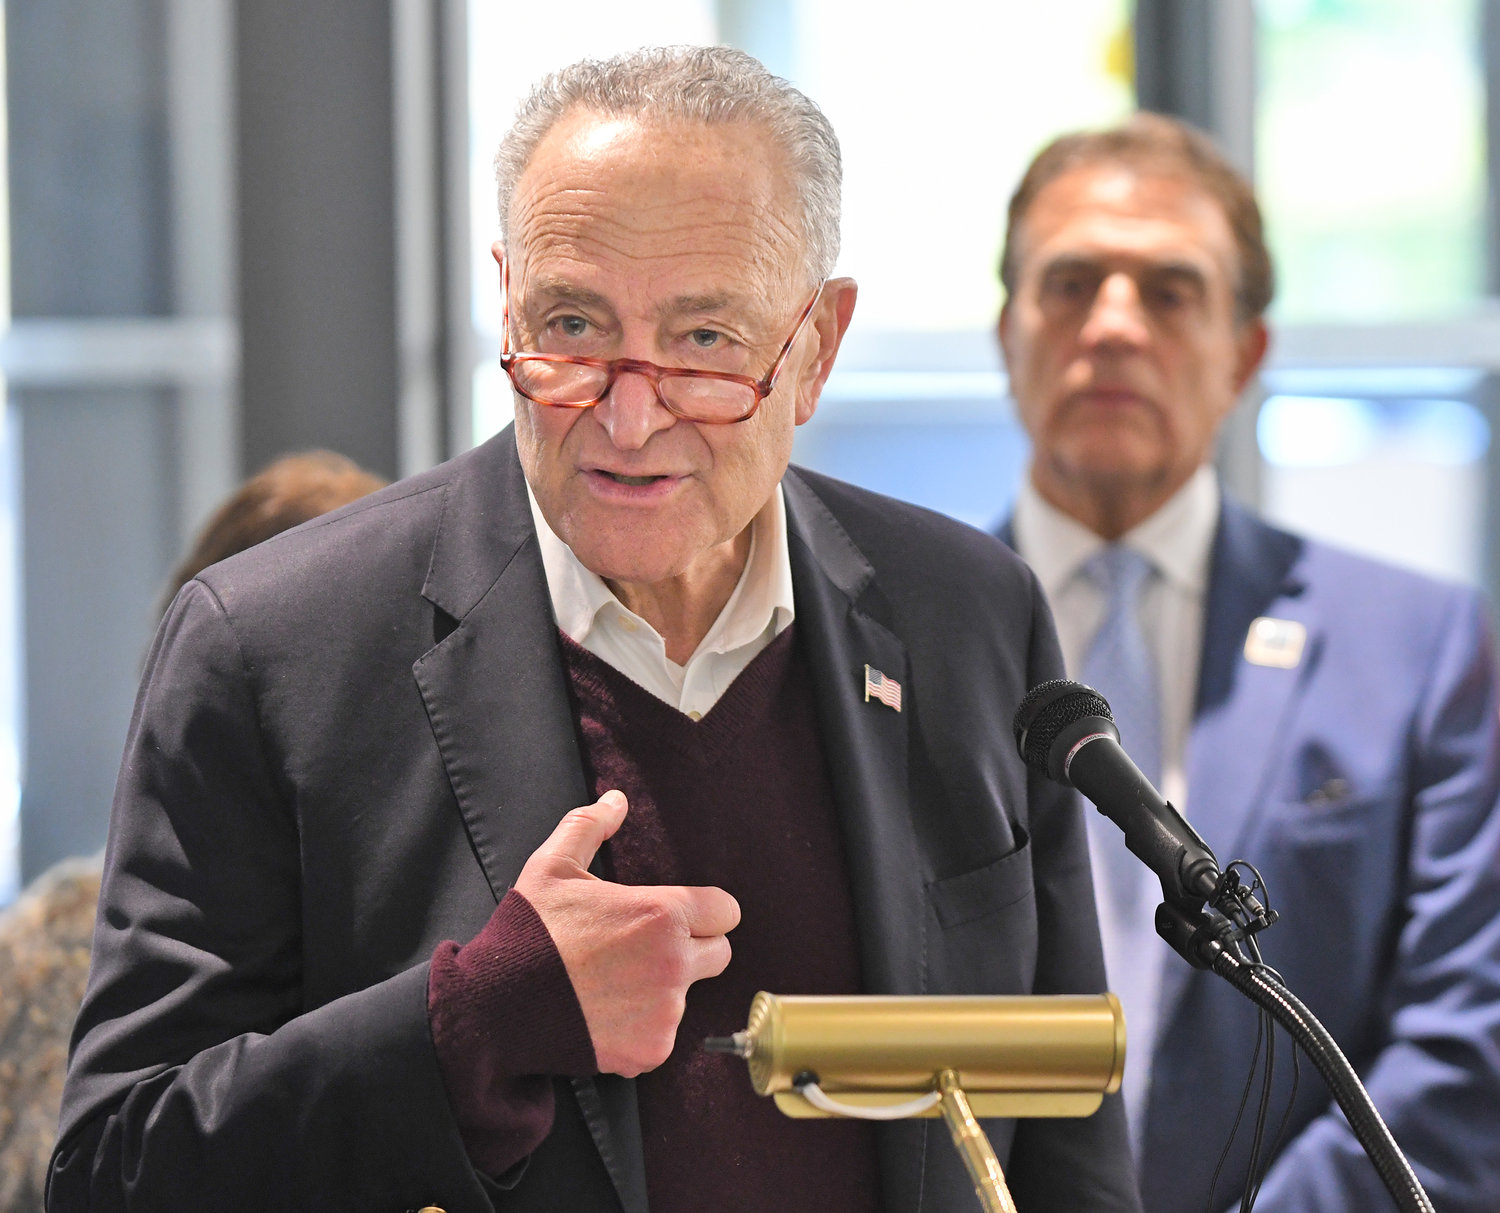 U.S. Sen. Charles E. Schumer speaks at a press conference at the SUNY Polytechnic Institute on Thursday afternoon.